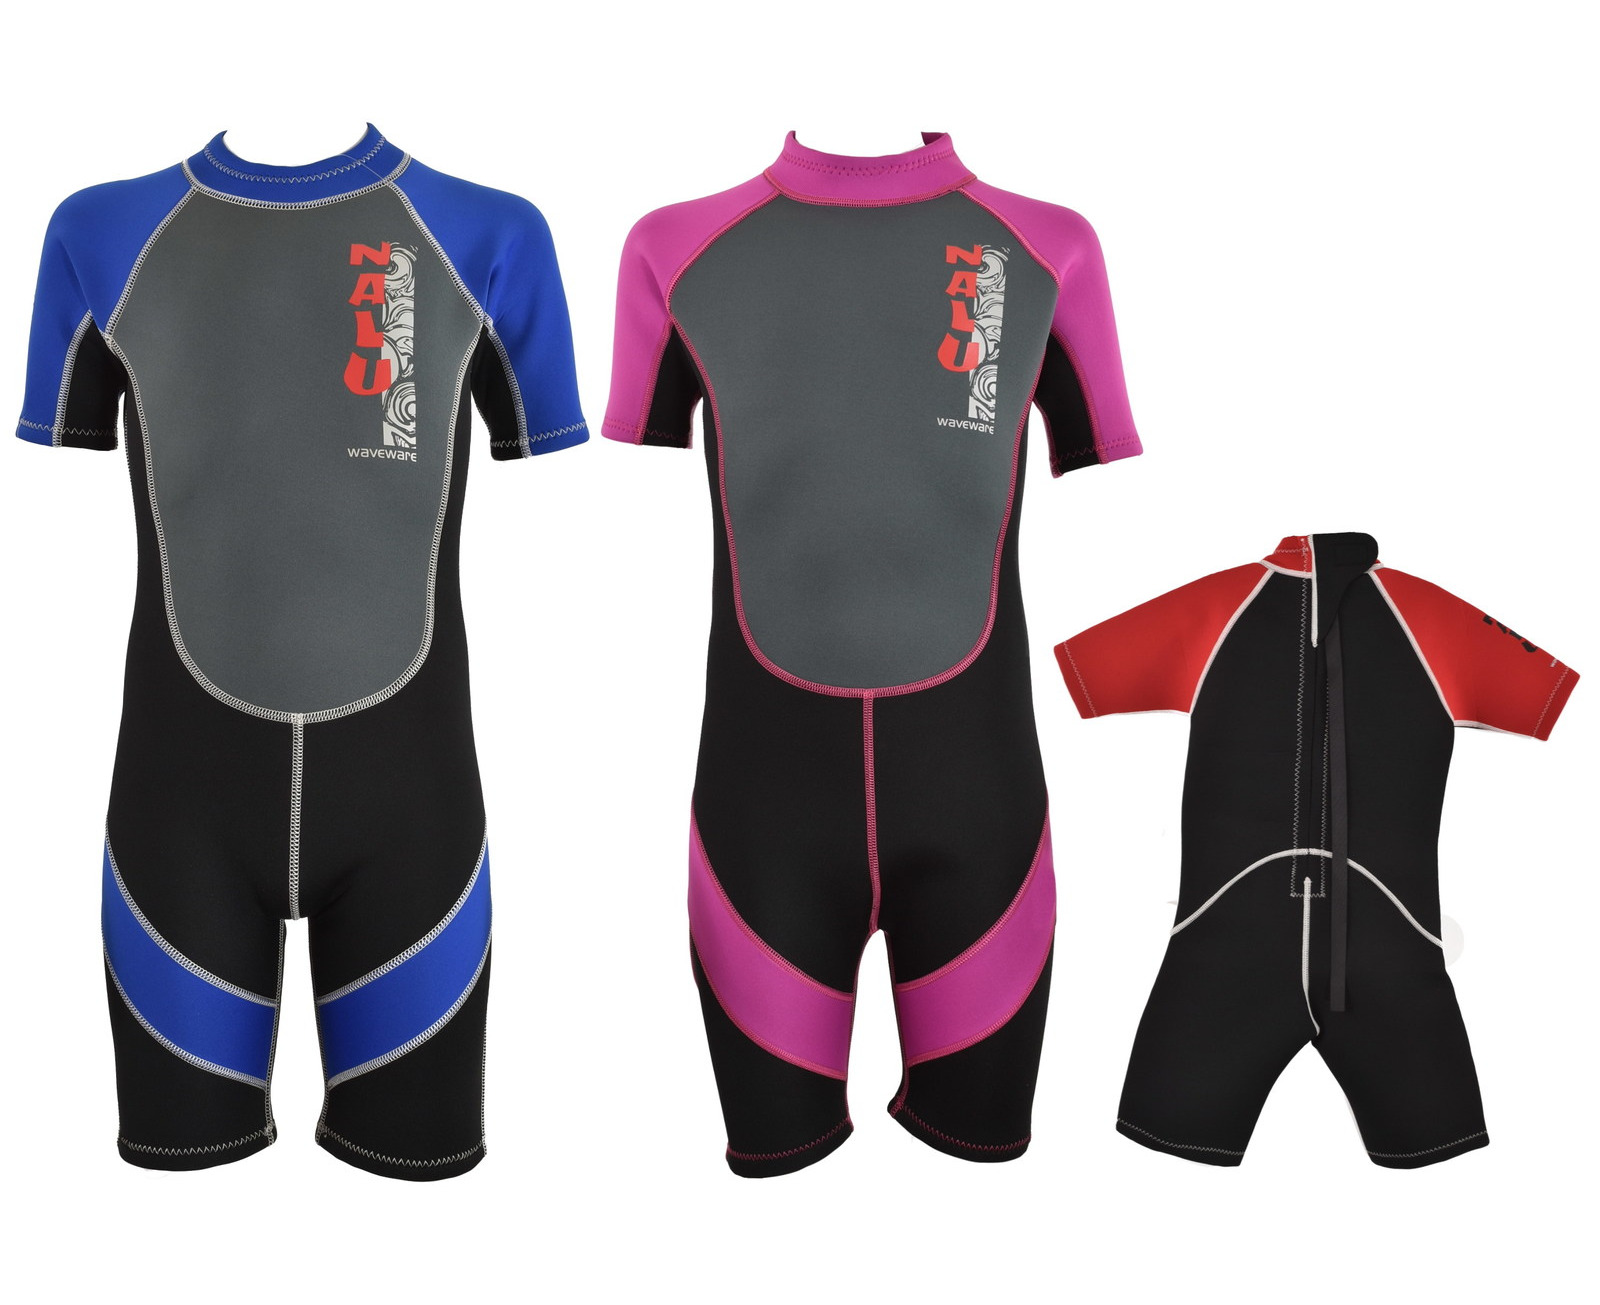 Kids Wetsuit,Thermal Swimsuit,Youth Boy's and Girl's One Piece Wet